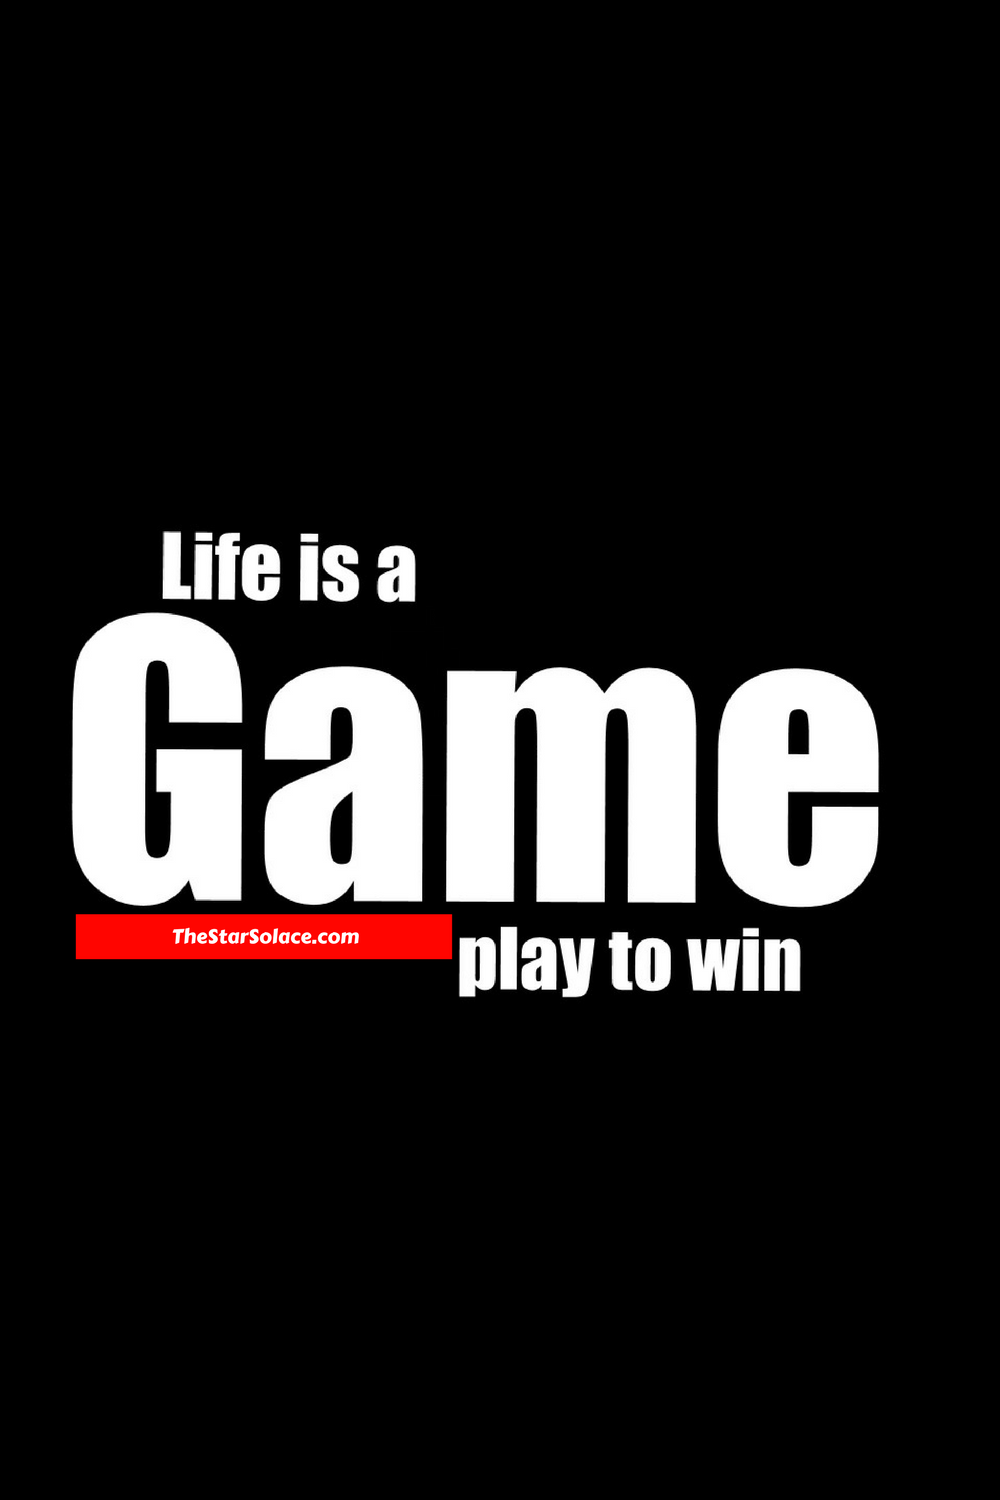 Life is a GAME play to win ALWAYS.star solace, motivation, inspiration, life, quotes, words, everything else. Winning quotes, Motivational quotes, Game quotes